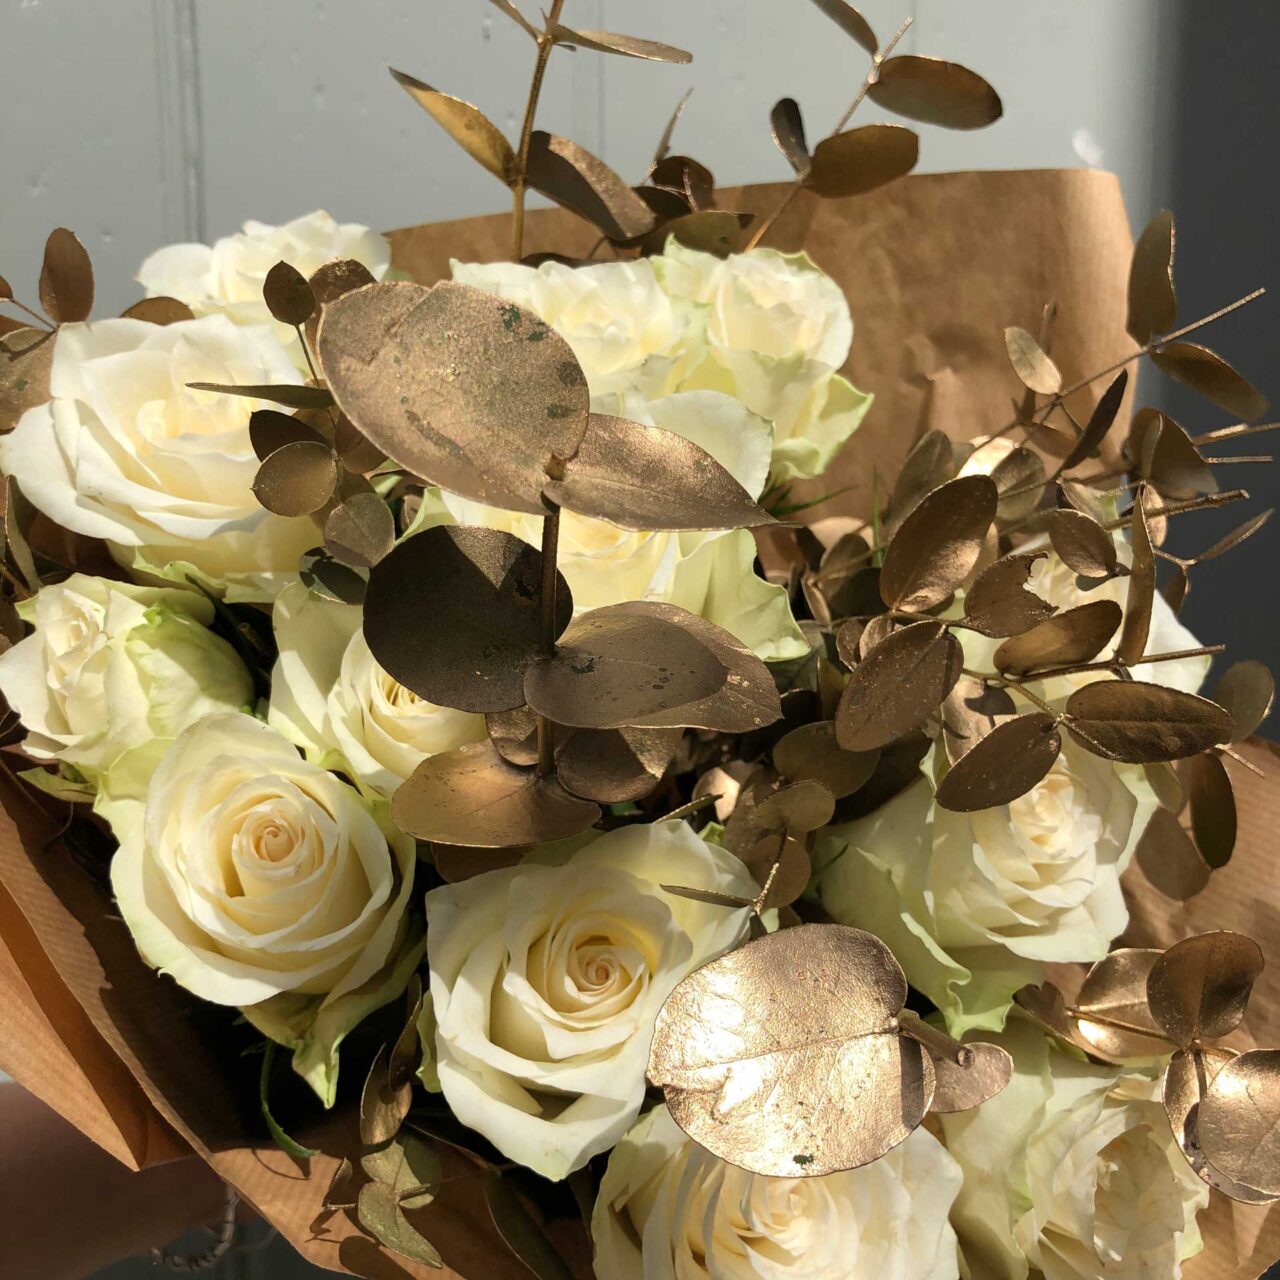 Christmas bouquet with roses and eucalyptus